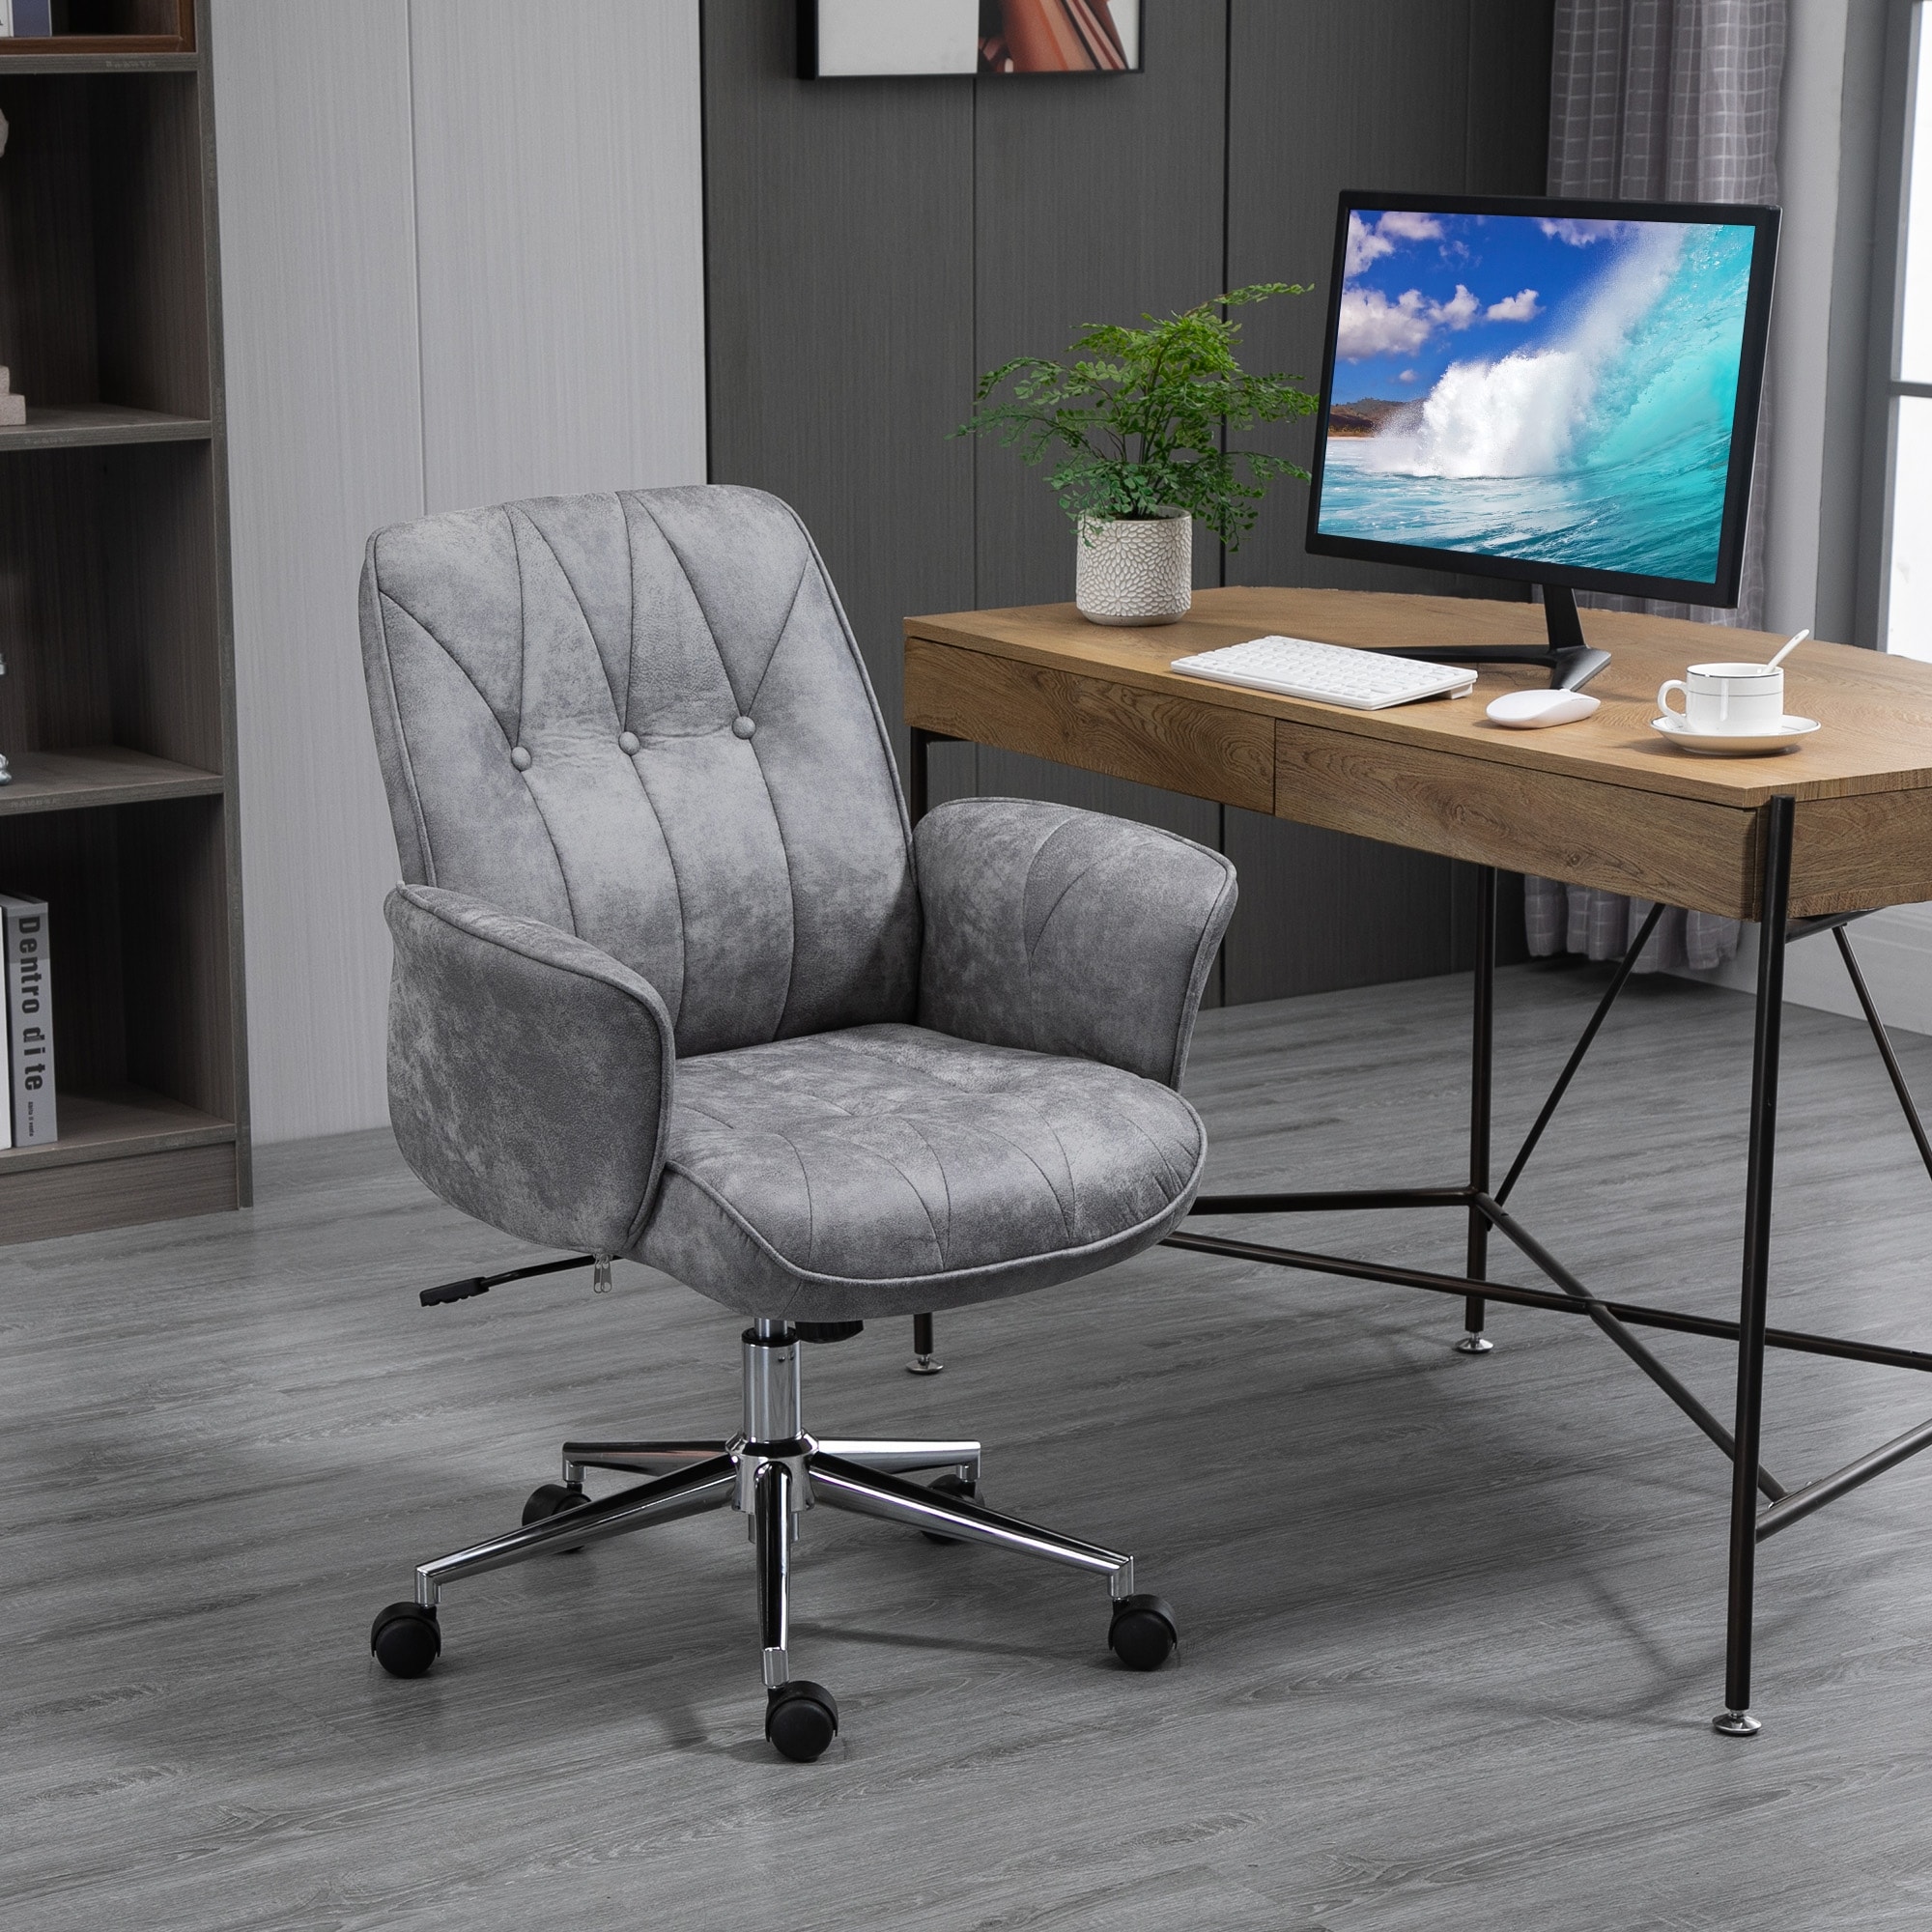 Vinsetto Ergonomic Office Chair Swivel High Back Computer Desk Chair with  Adjustable Height Flip Up Armrest Comfy Thick Padded Cushions Wheels Grey